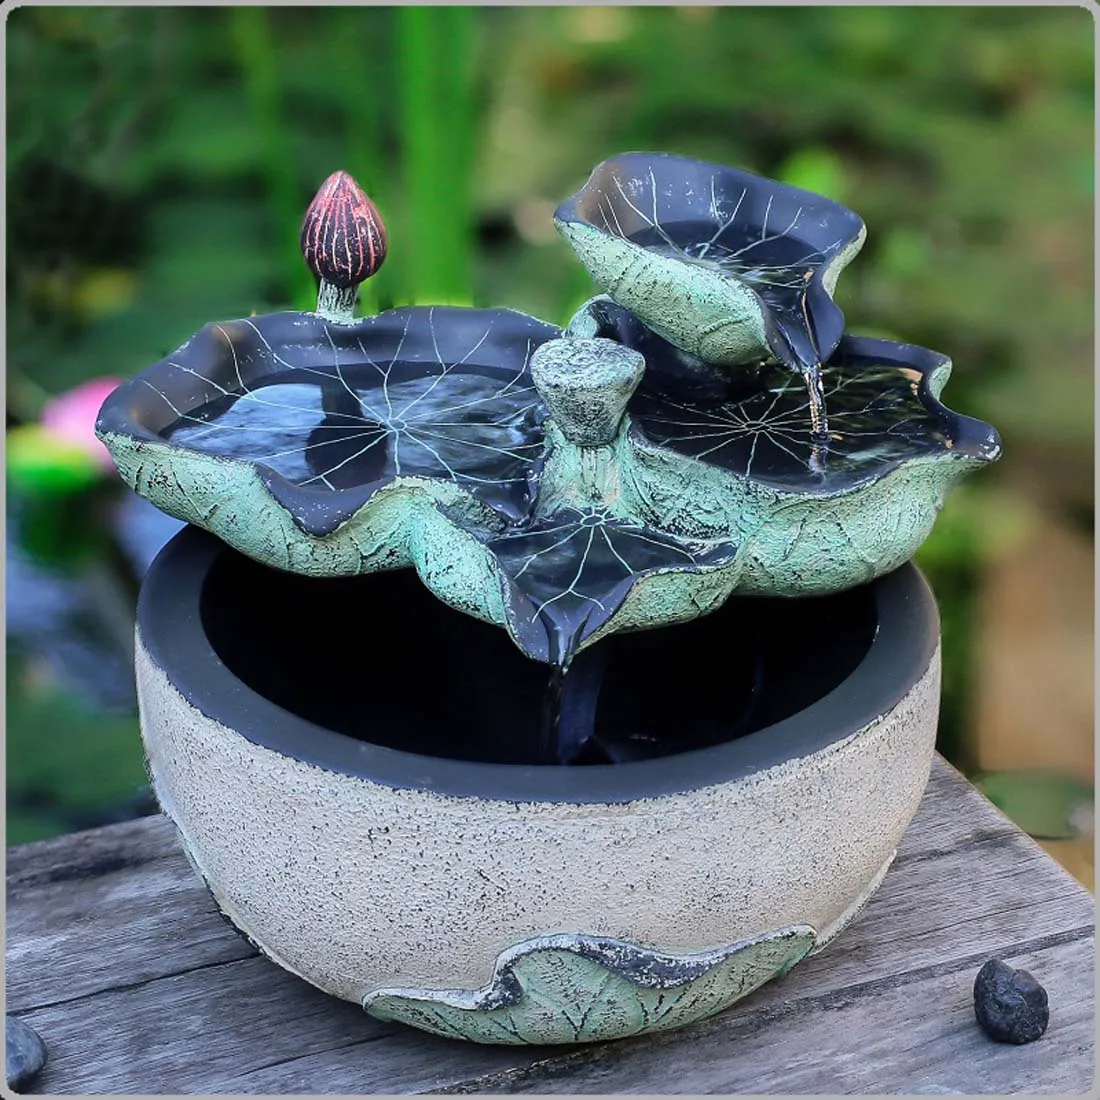 Flowing Water Feng Shui Small Fountain Water Feature Decoration Living Room Bedroom Desktop Humidifier Creative Home Accessories